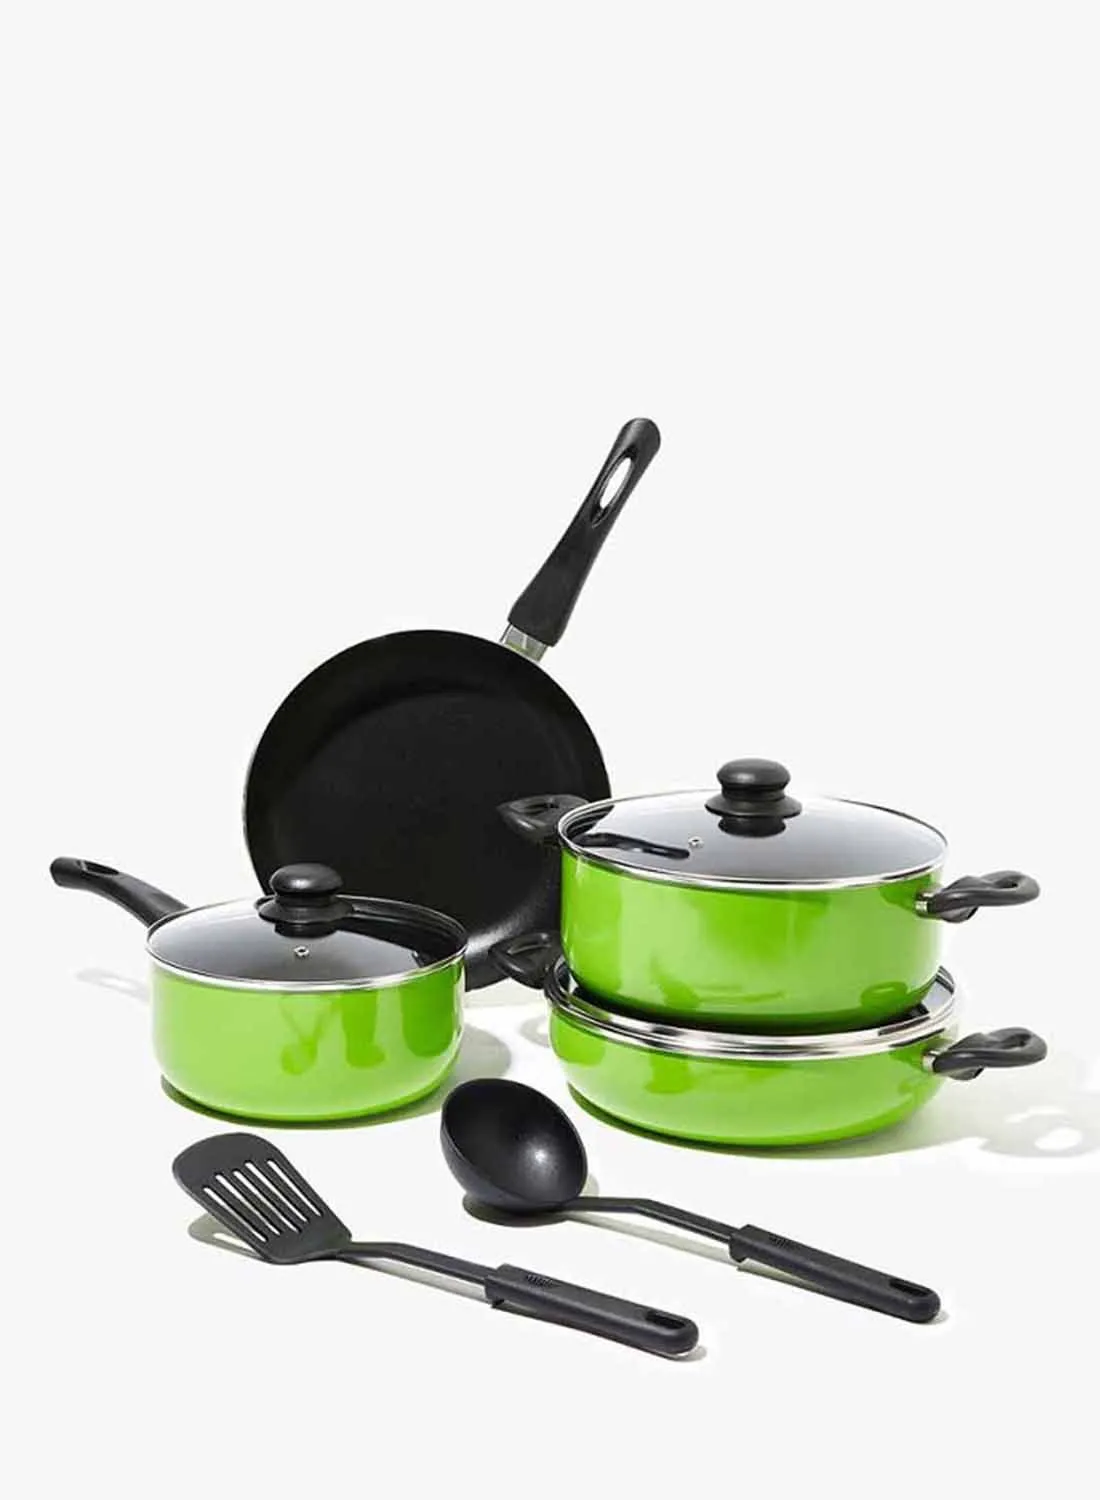 Amal 9 Piece Cookware Set - Aluminum Pots And Pans - Non-Stick Surface - Tempered Glass Lids - PFOA Free - Frying Pan, Casserole With Lid, Saucepan With Lid, Kitchen Tools - Green